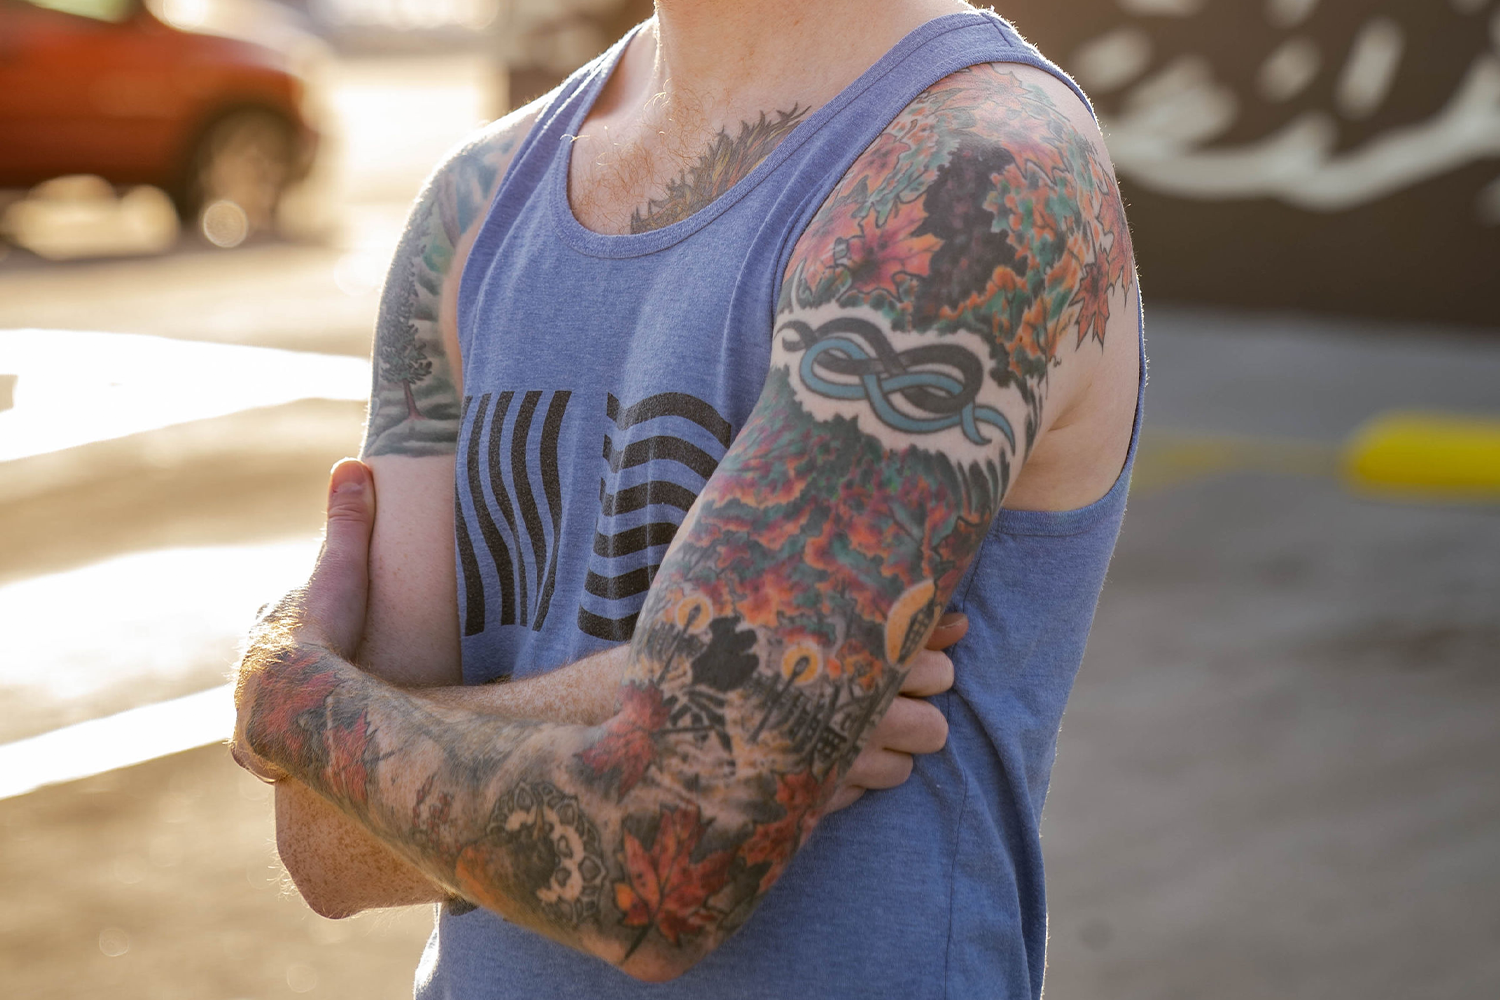 Being a tattoo artist is a pain in the neck, | EurekAlert!